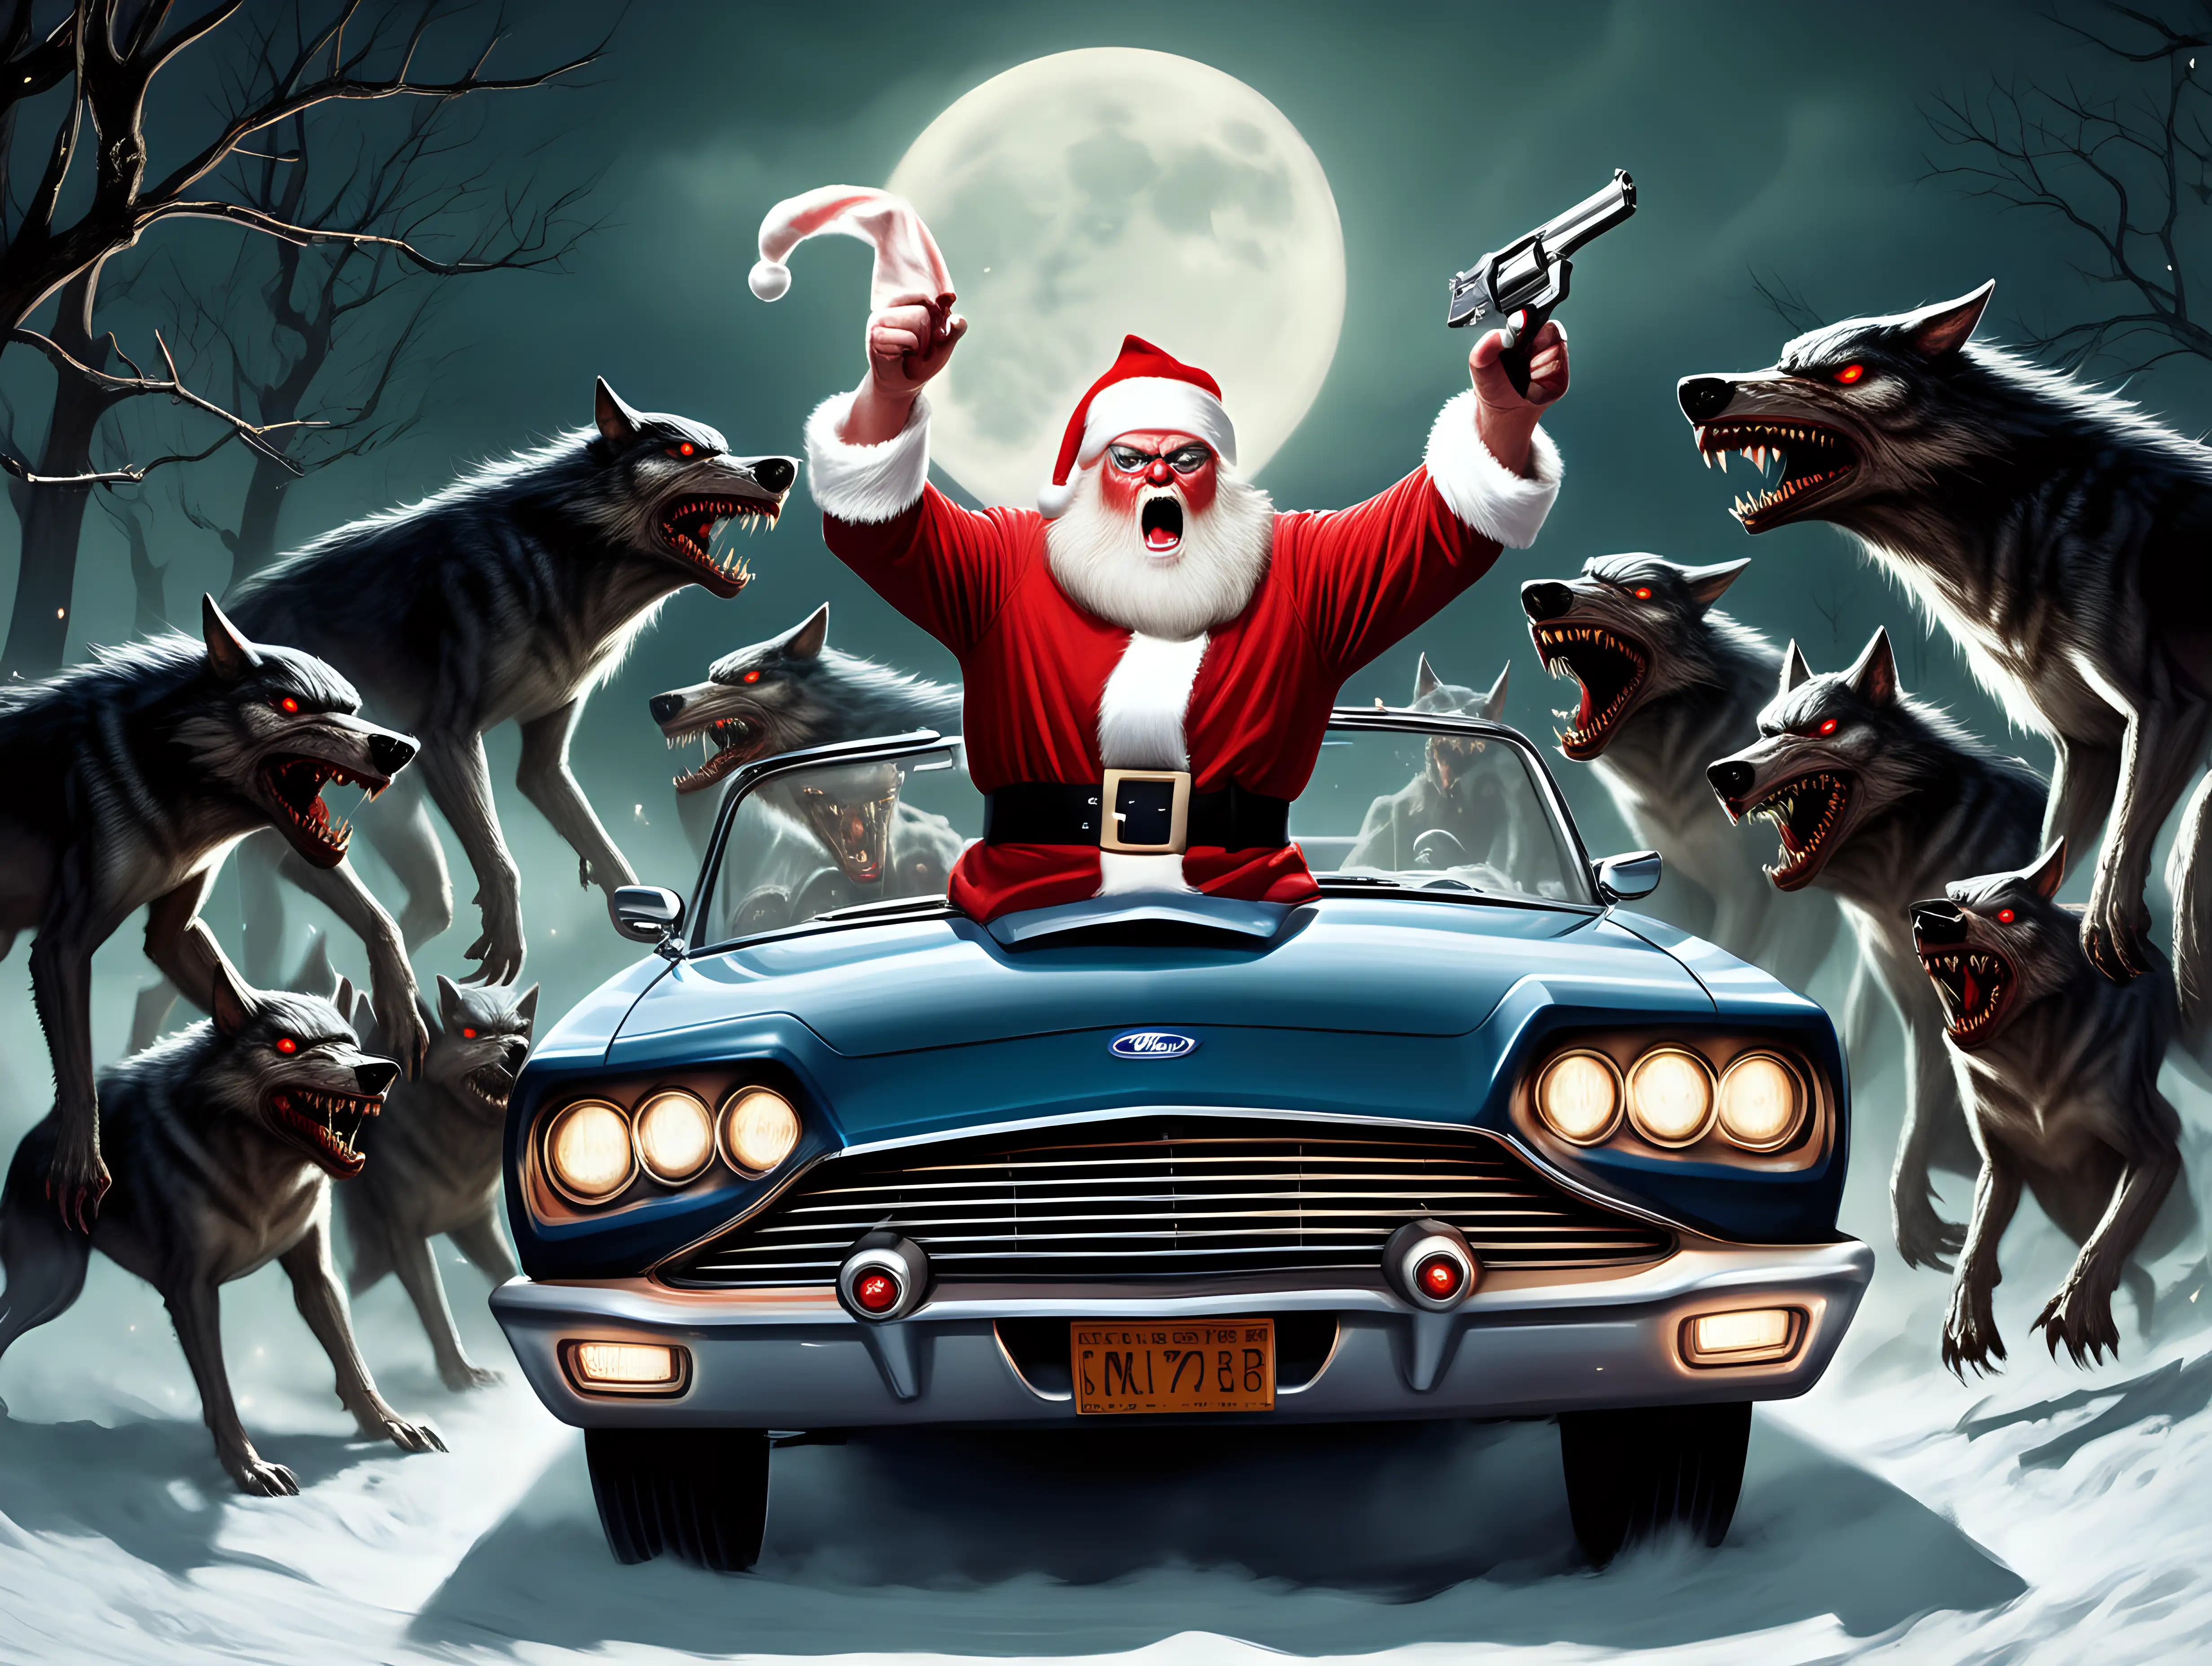  Kris Kringle in a Ford Thunderbird fighting a horde of werewolves